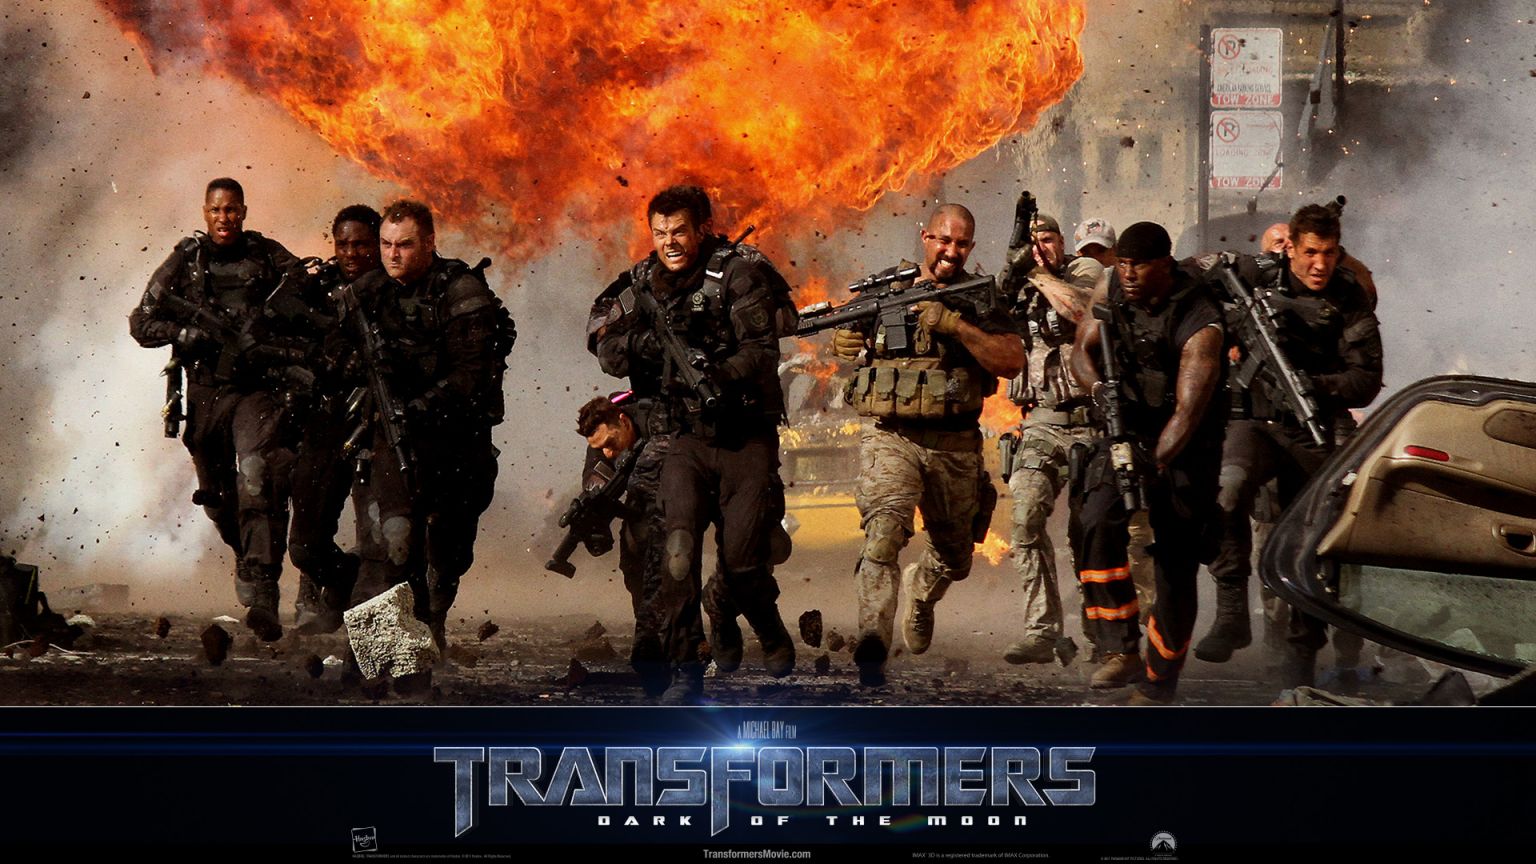 Military in Transformers 3 wallpaper in 1536x864 resolution